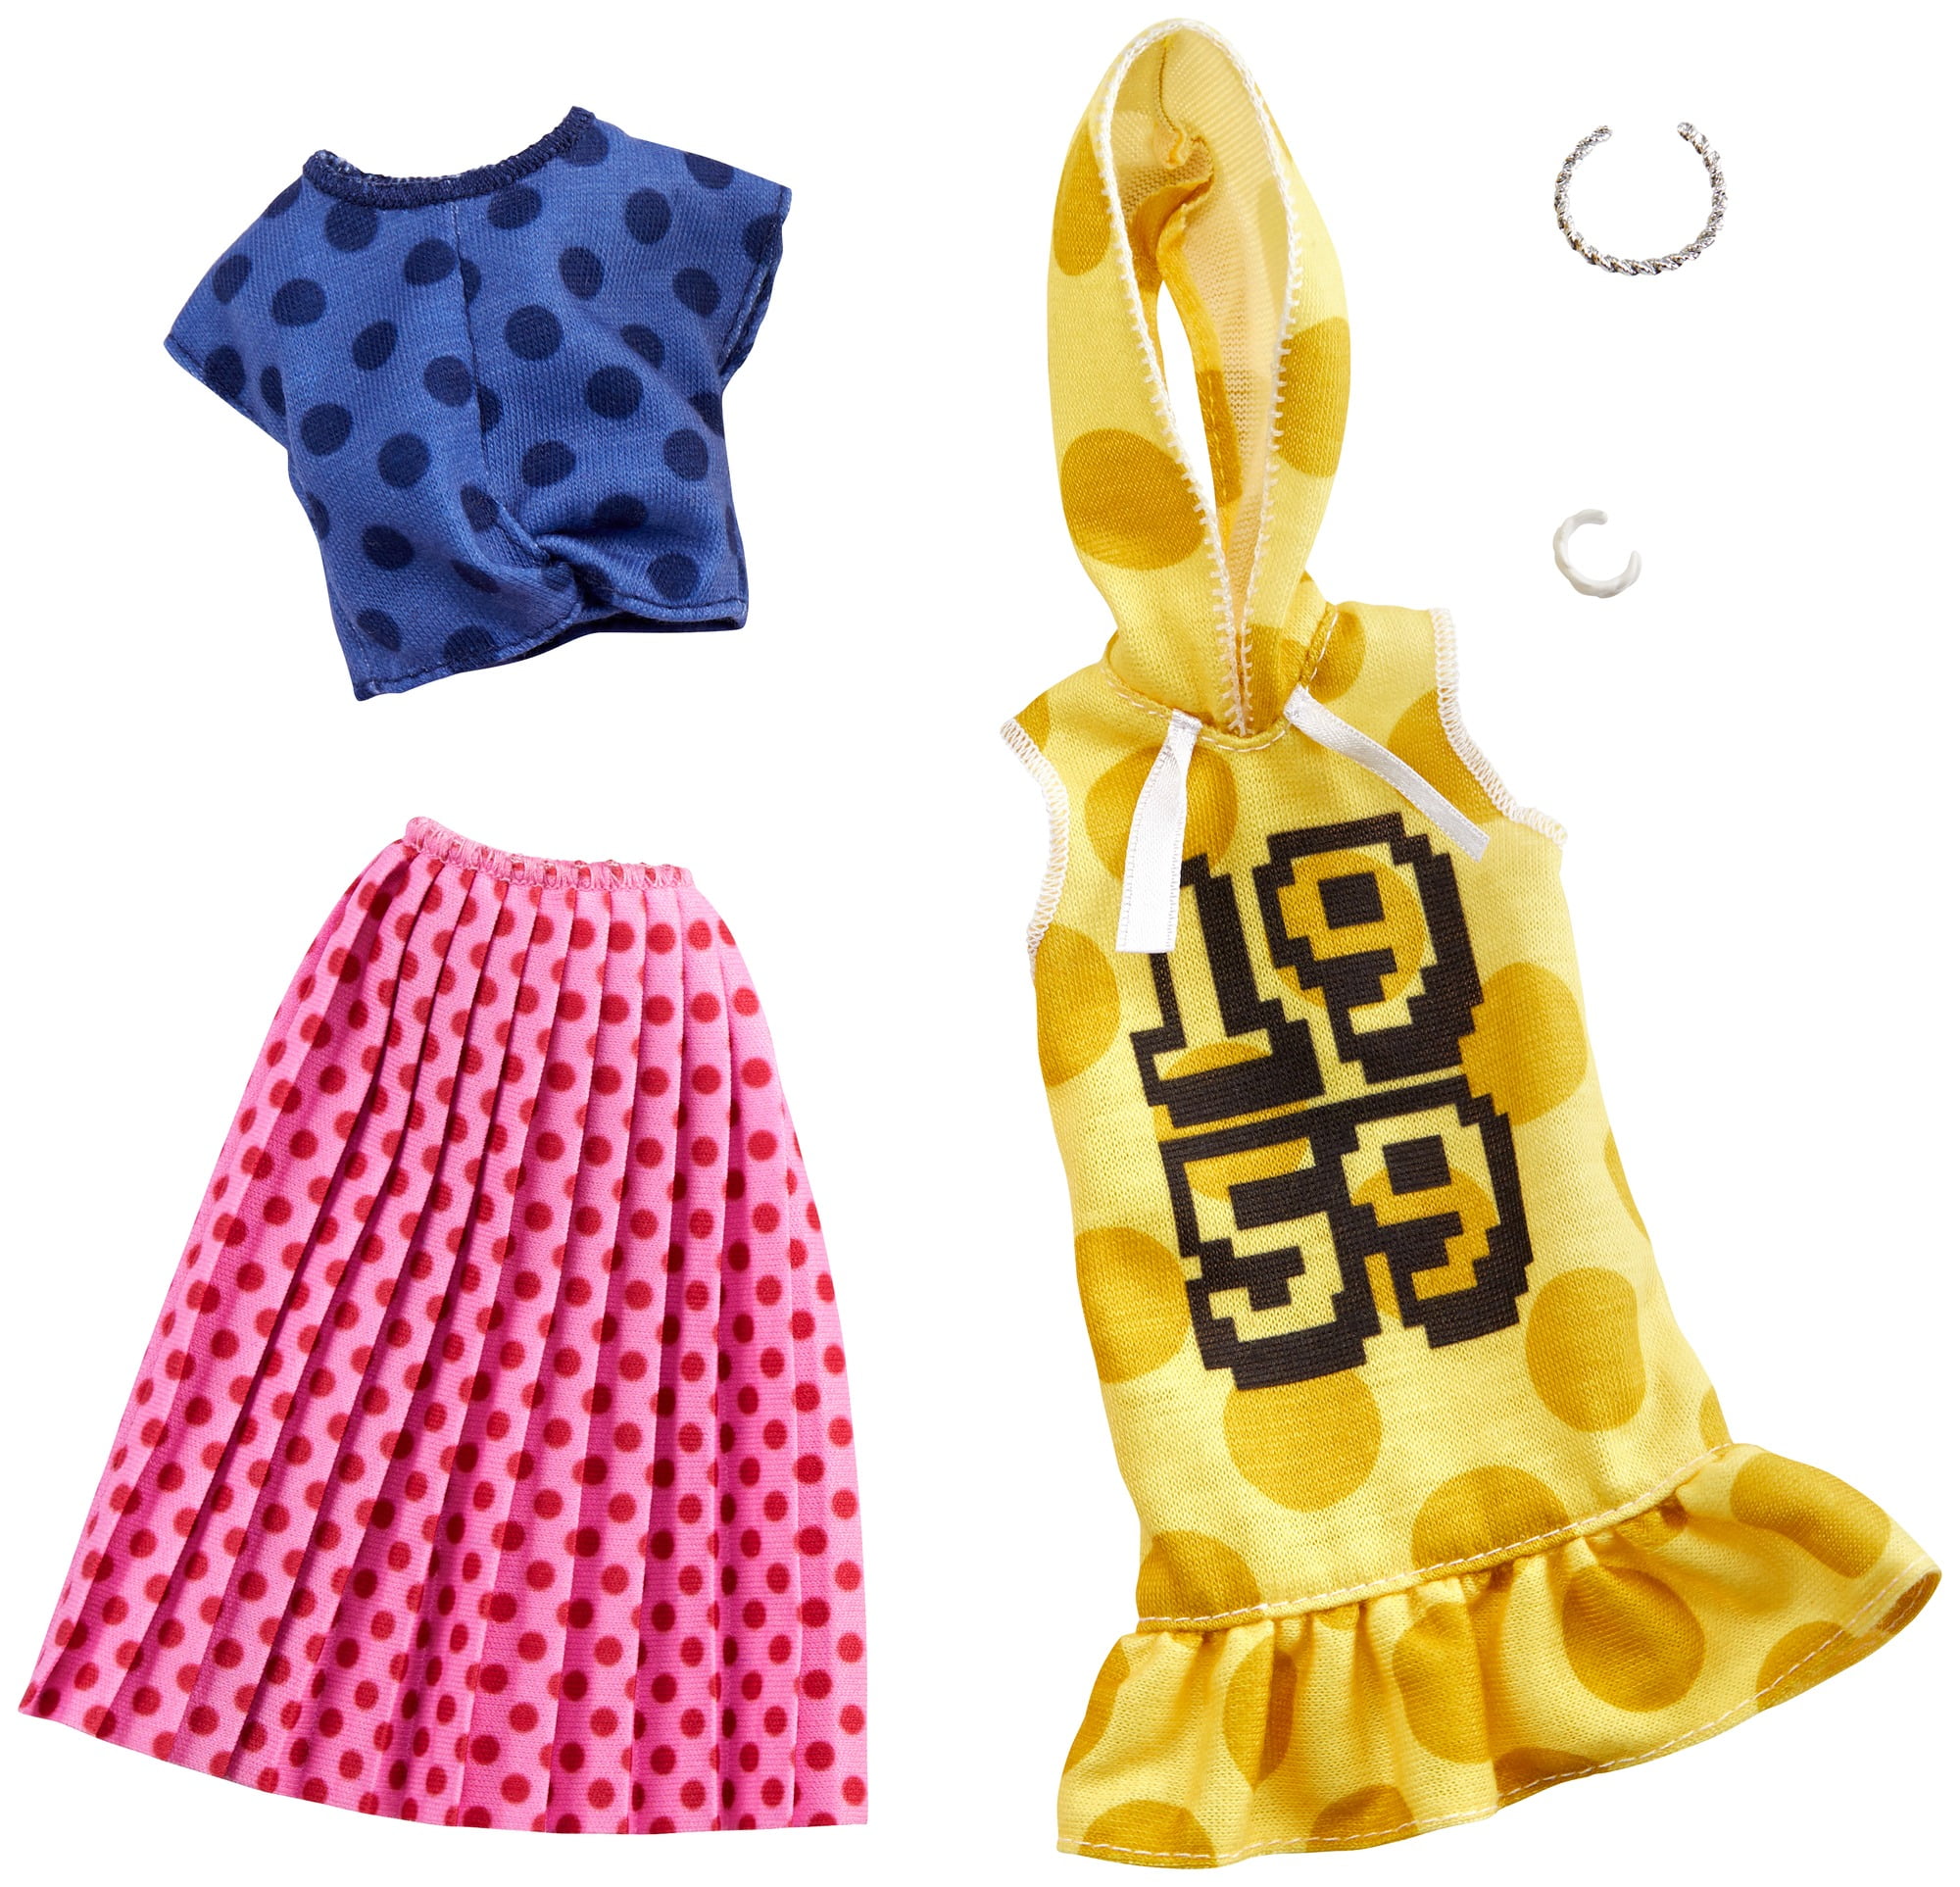 Barbie Clothes -- 2 Outfits and 2 Accessories for Barbie Doll - Walmart.com